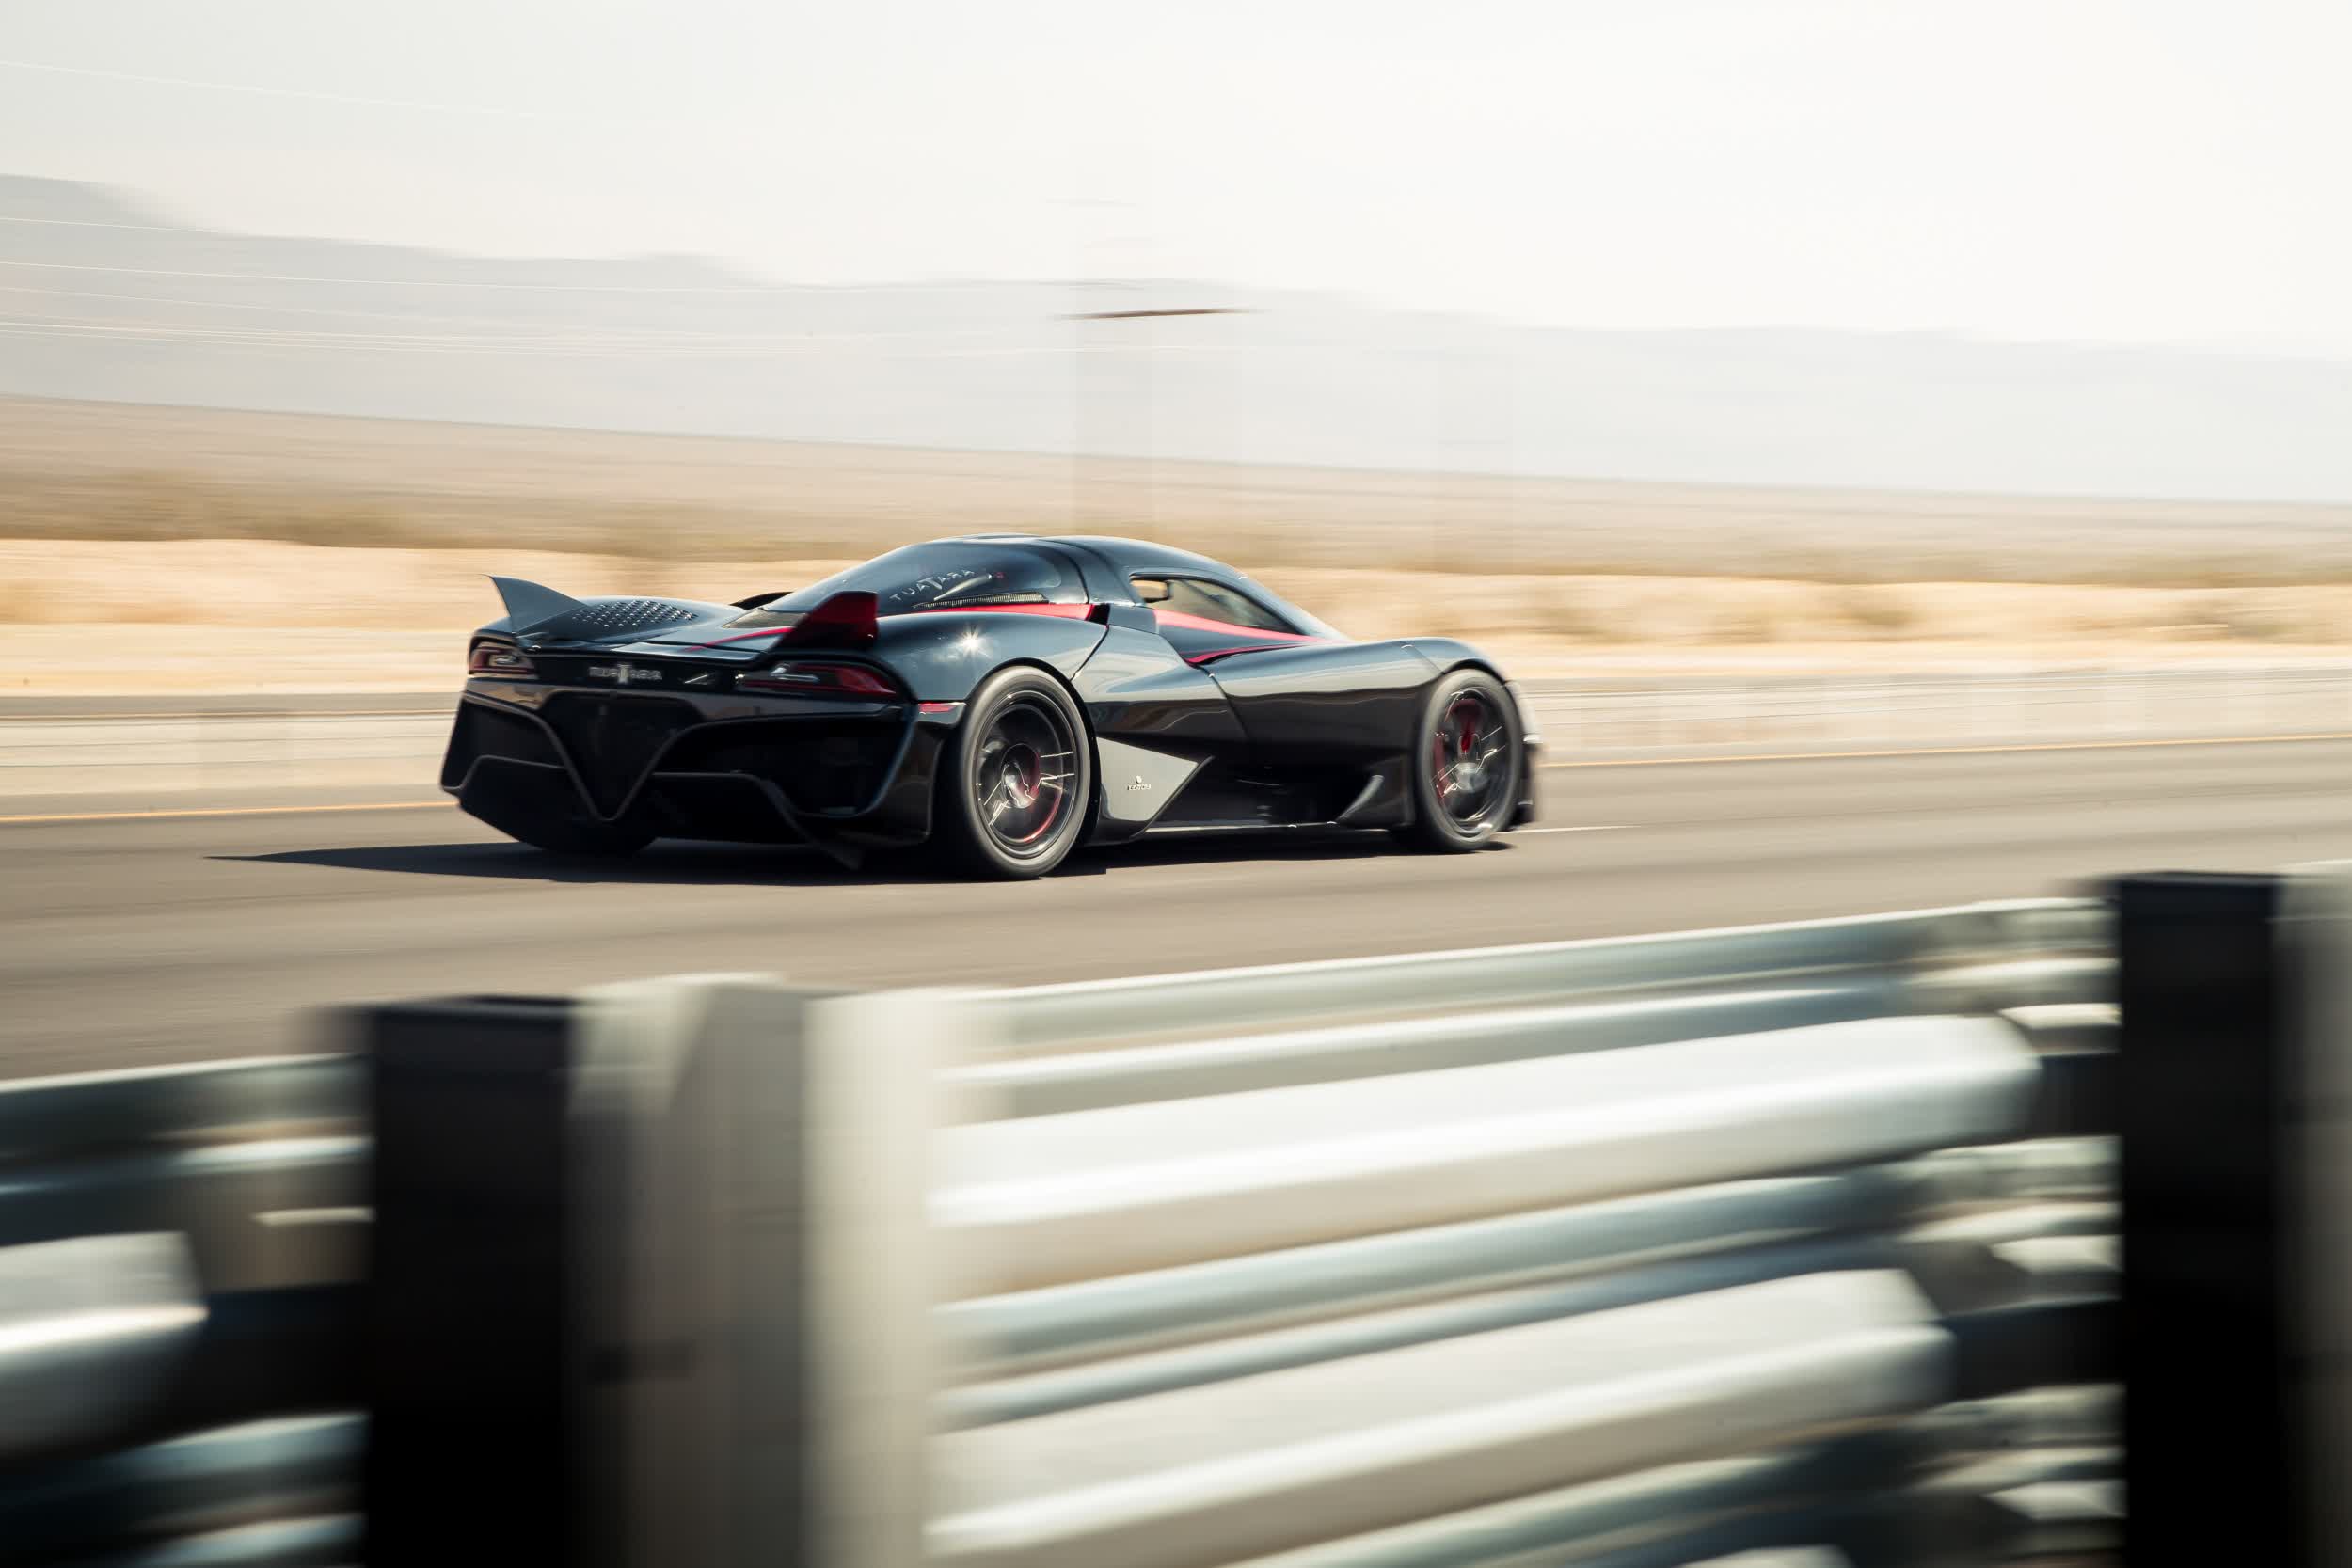 SSC clears the air, confirms its Tuatara did not break 300 MPH barrier during controversial runs